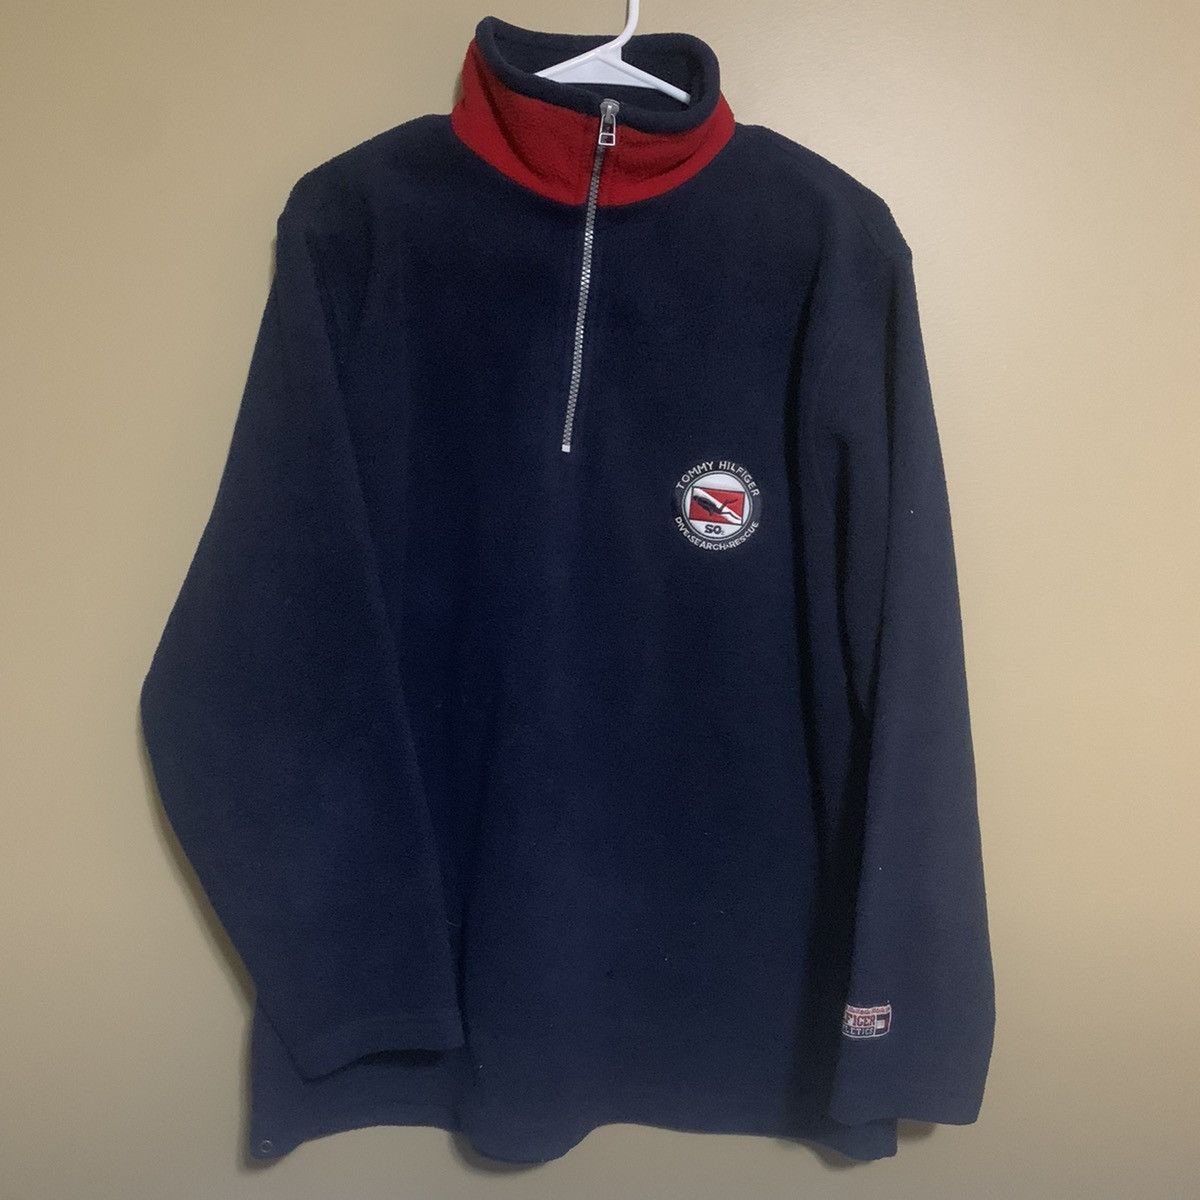 Vintage Tommy Hilfiger Dive Search and Rescue Rare Fleece Zip Up | Grailed